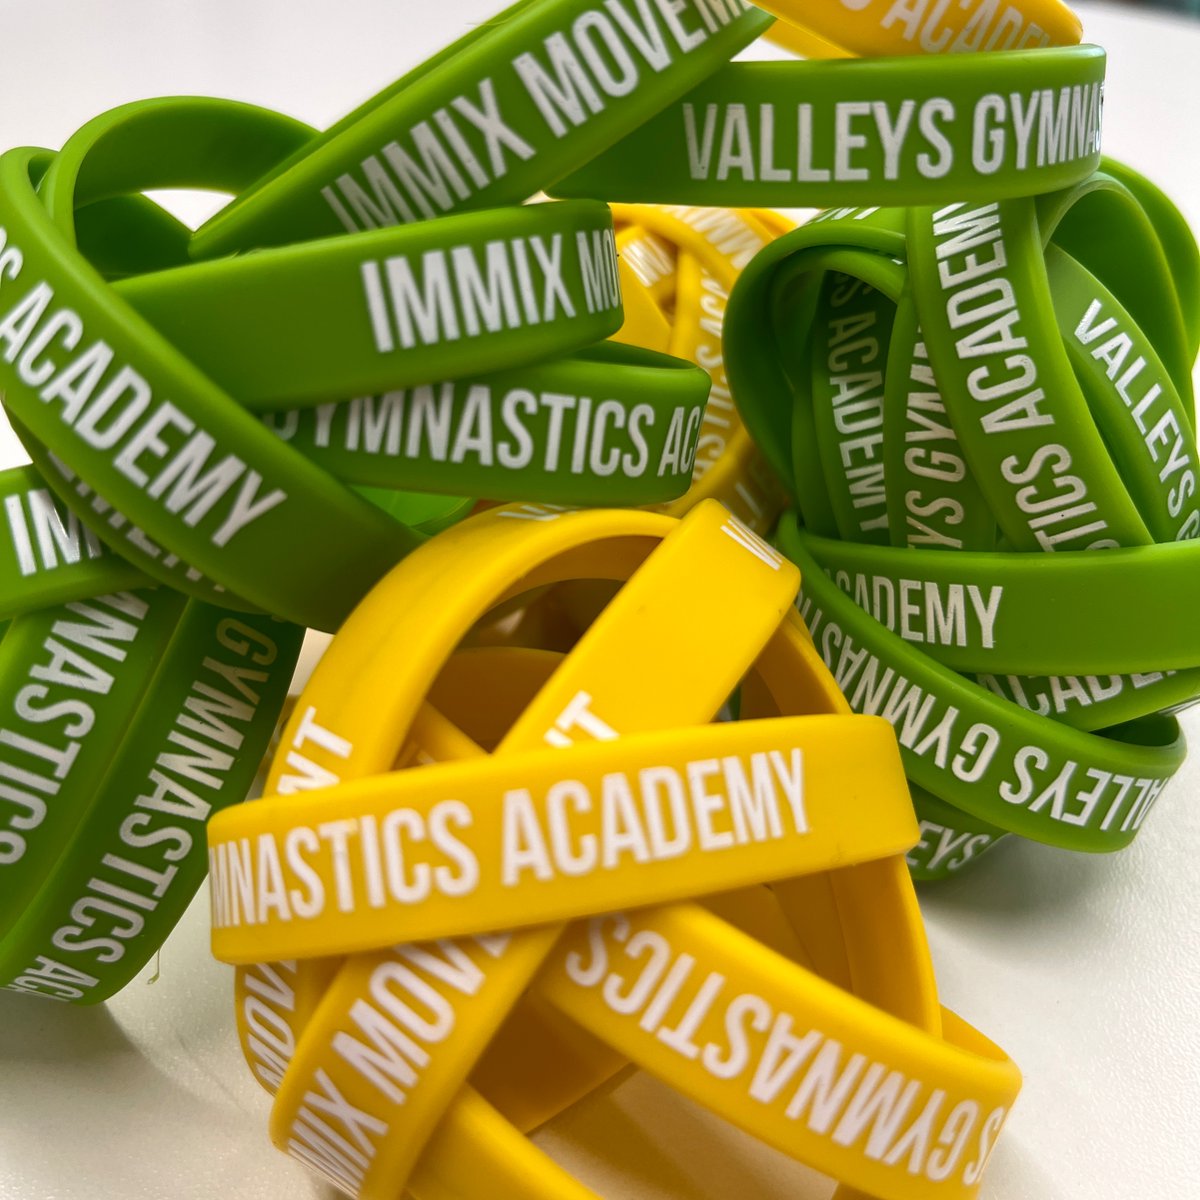 We are piloting something new!! Coach Craig has developed our NEW Elements Freerunning scheme ... with 4 levels to achieve and a wrist band available on the completion of each! Keep an eye on our socials if you wish to join in! Sign up for a class here: valleysgymnasticsacademy.co.uk